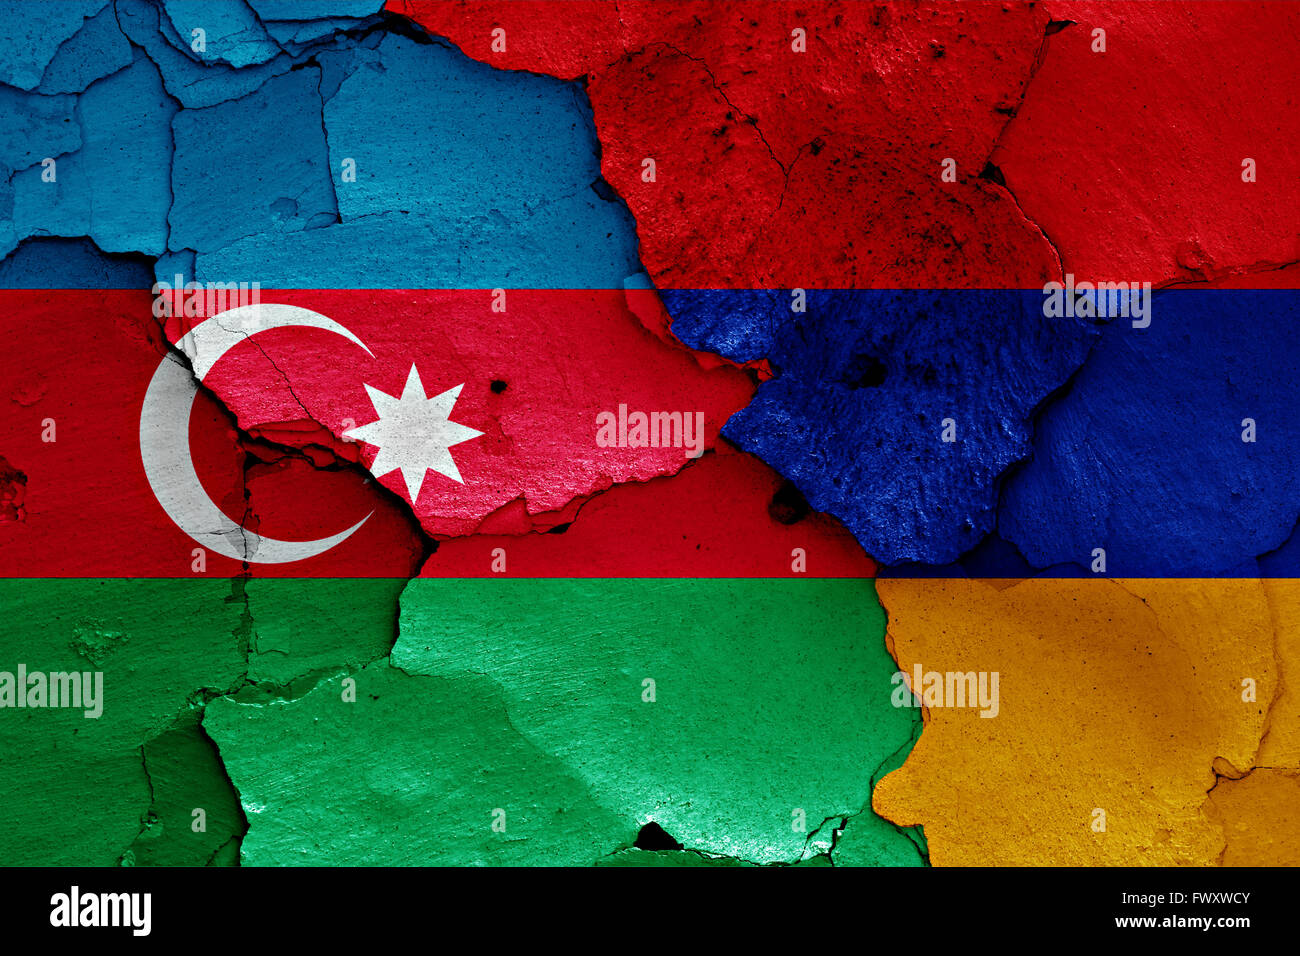 flags of Azerbaijan and Armenia painted on cracked wall Stock Photo